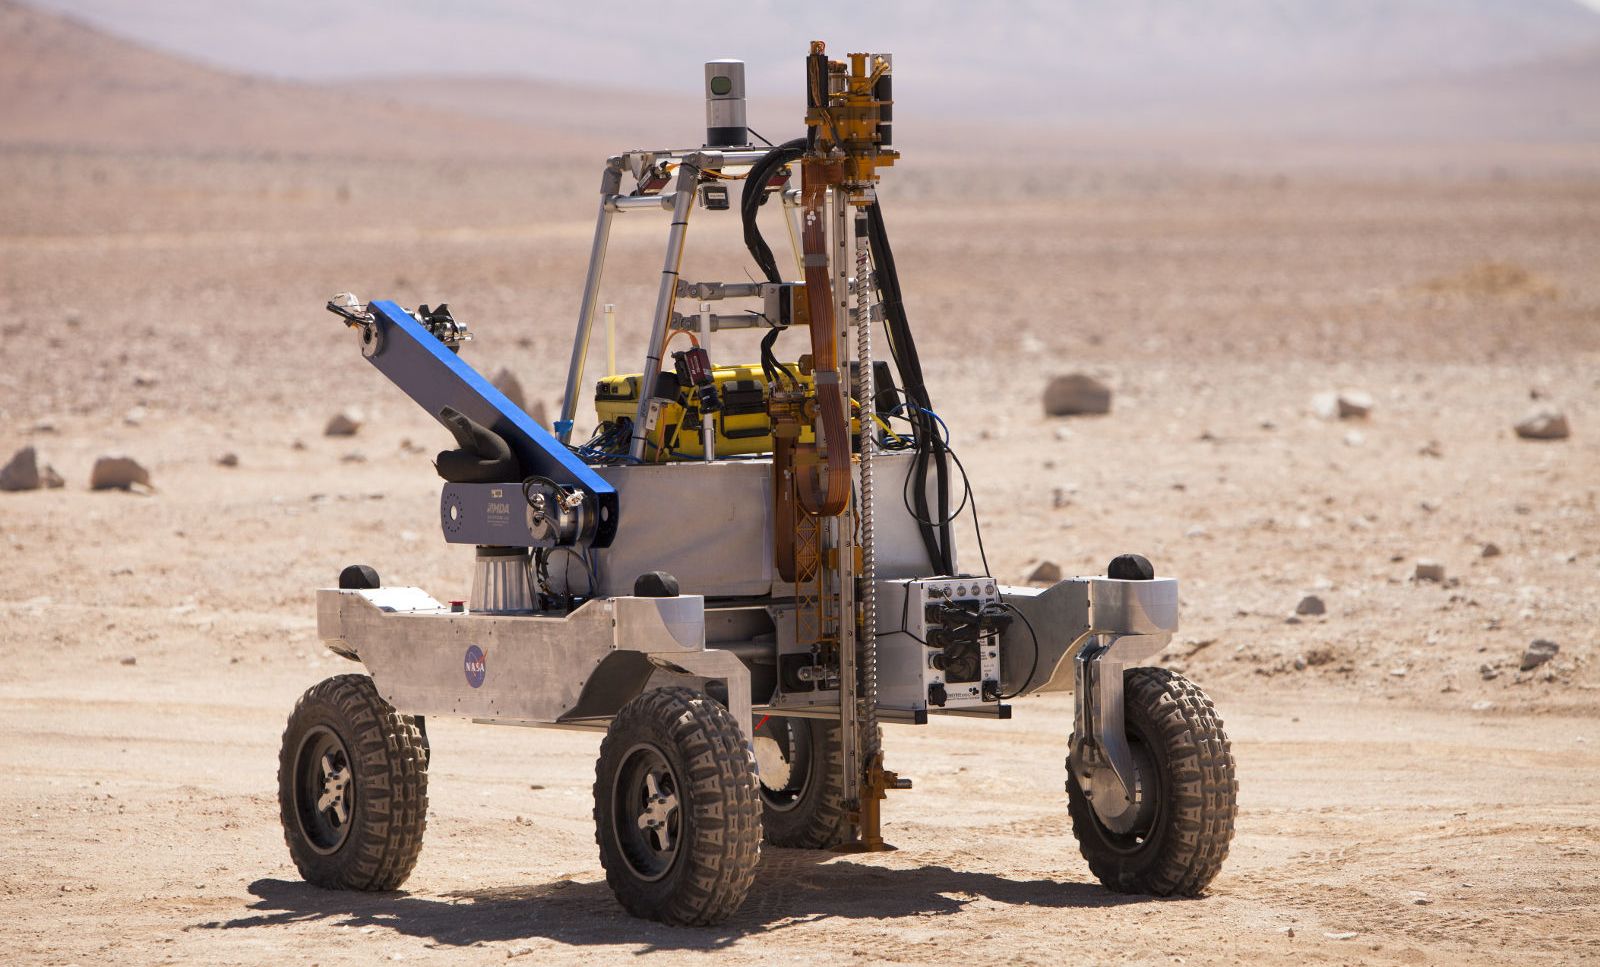 NASA is experiencing in the Chilean desert instruments to search for life on Mars